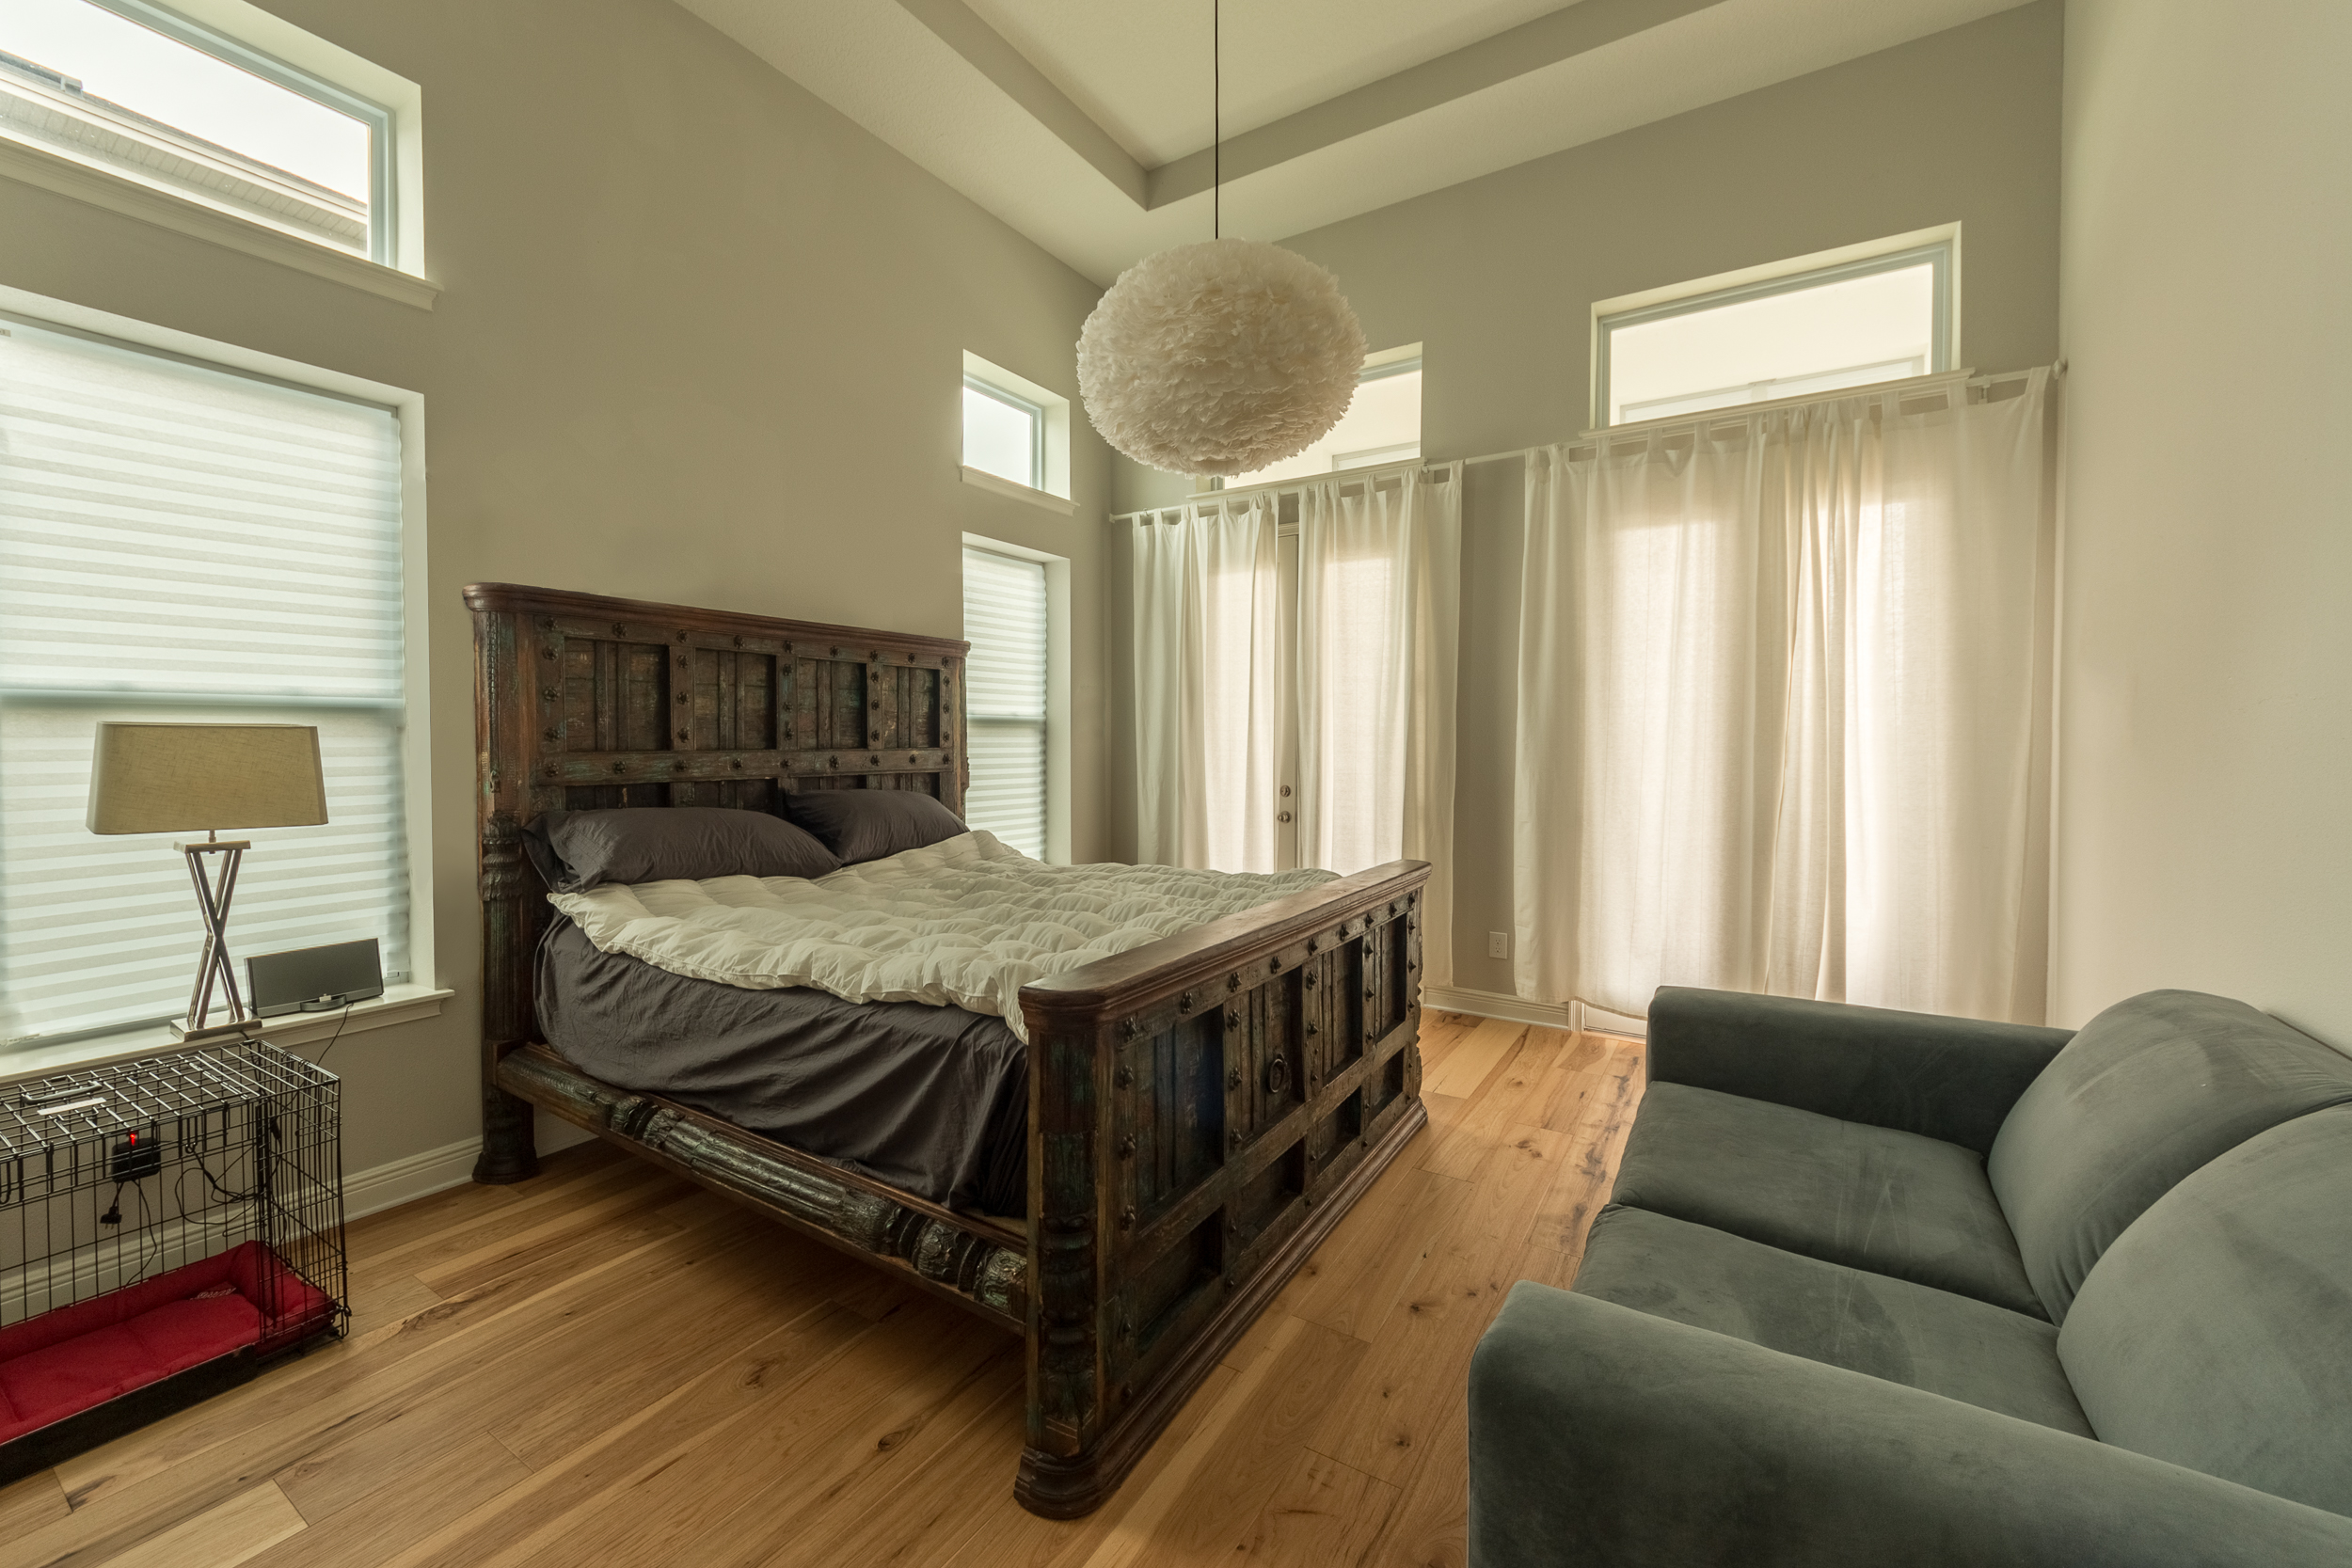 Wire-Brushed Natural Hickory Wood Flooring in Bedroom with Curtains Drawn